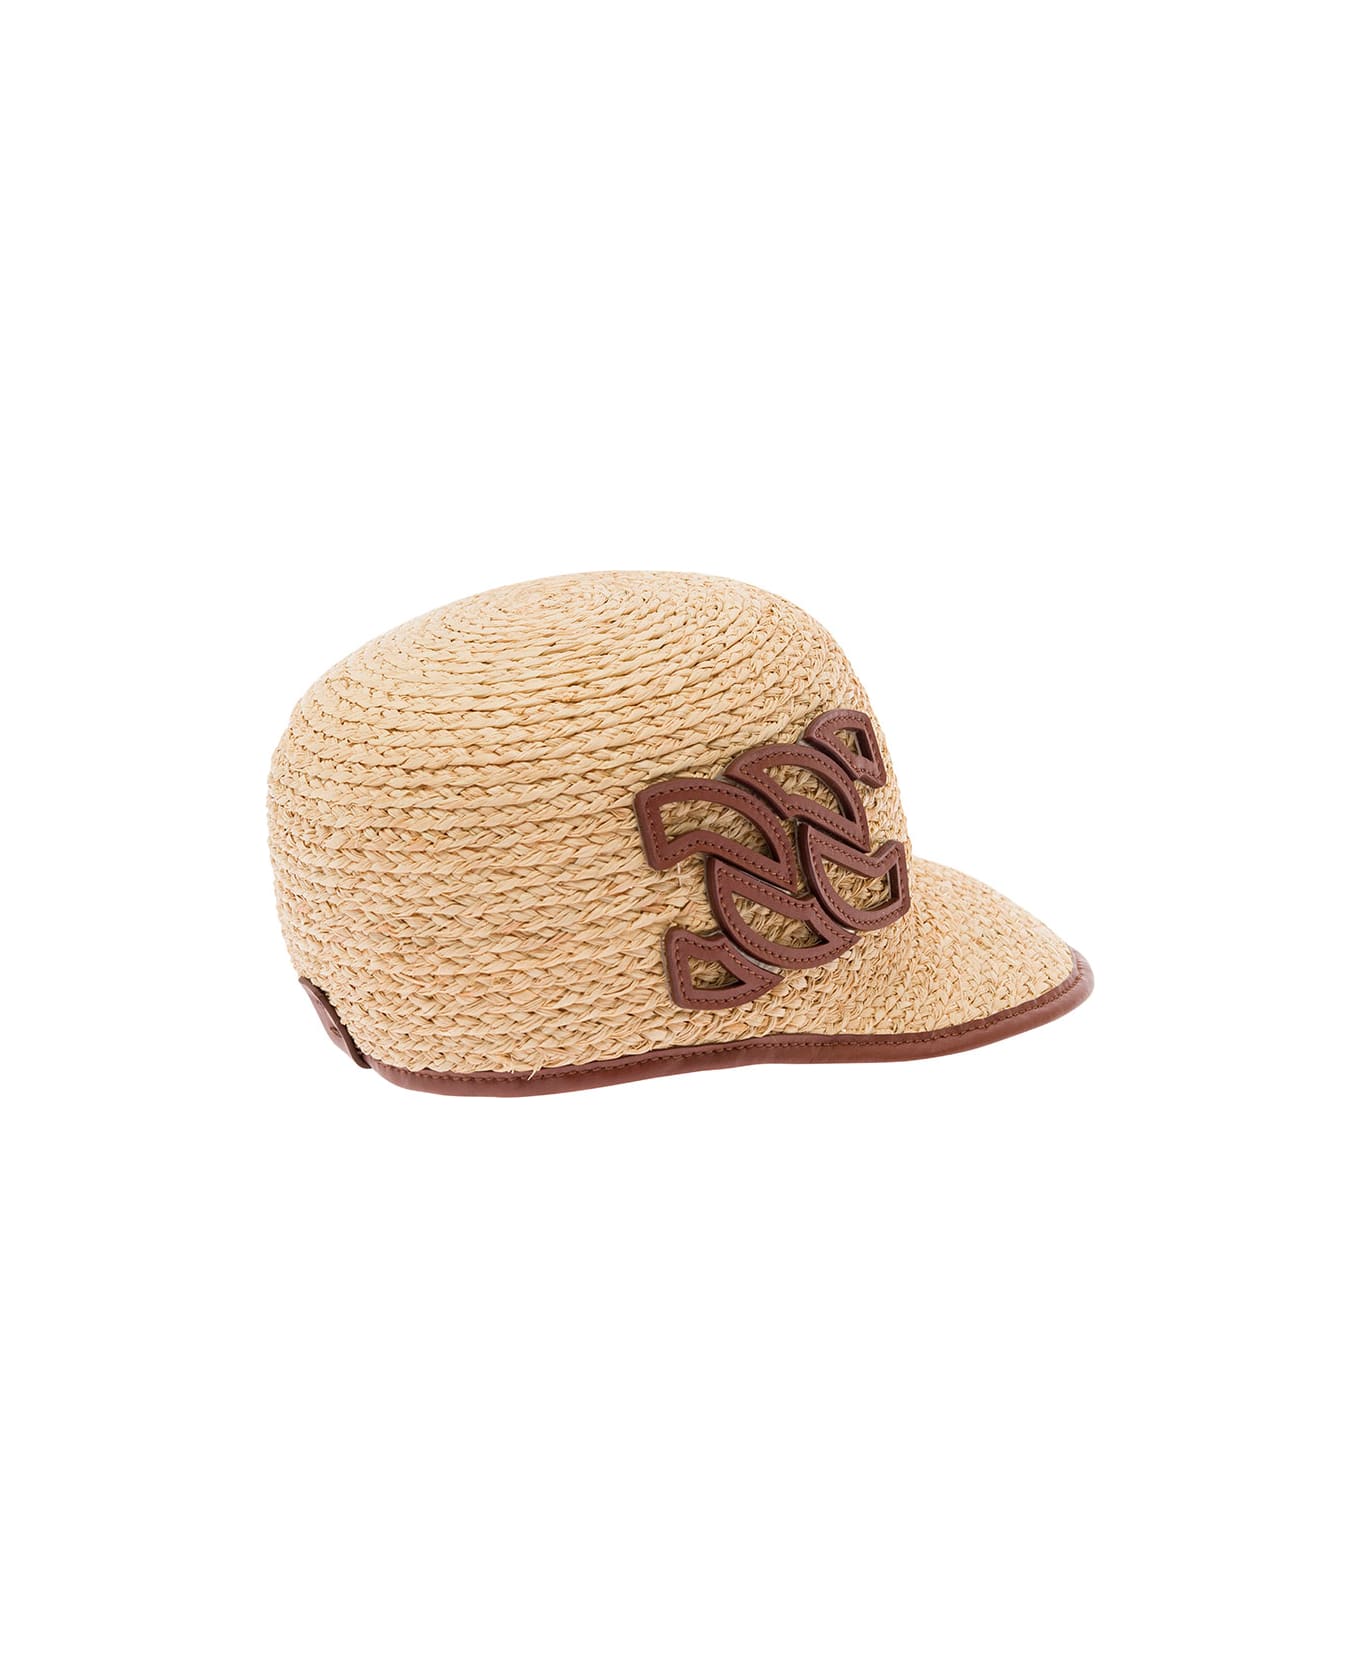 Casadei Beige Baseball Cap With Logo Detail In Leather And Rafia Woman - Beige